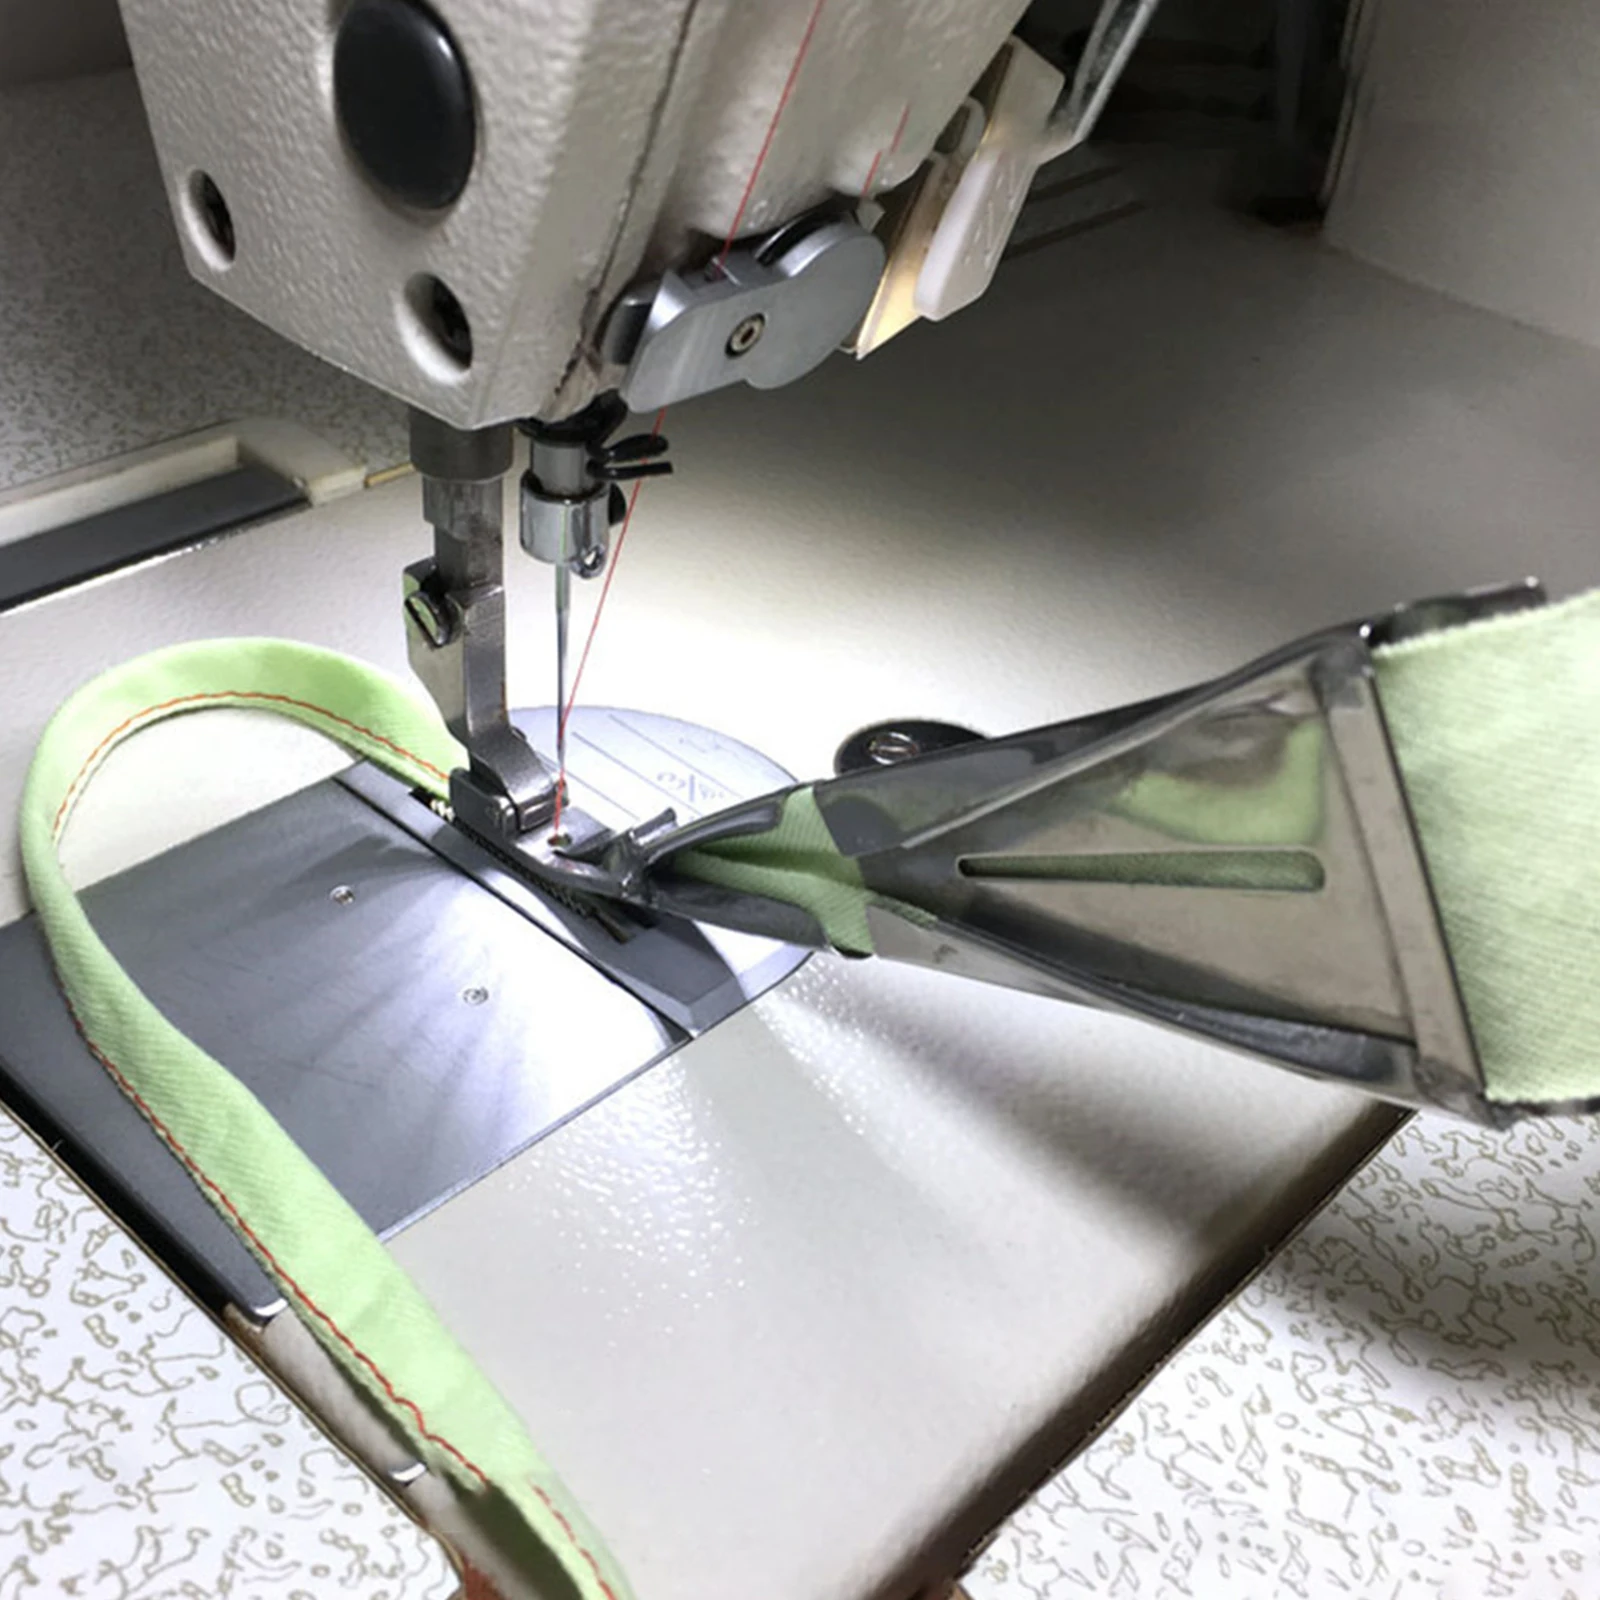 Industrial Sewing machine Flat car Pull Tube Presser Foot F515 Suspenders Shoulder Strap Trousers Straps Folding Edge Wrapper